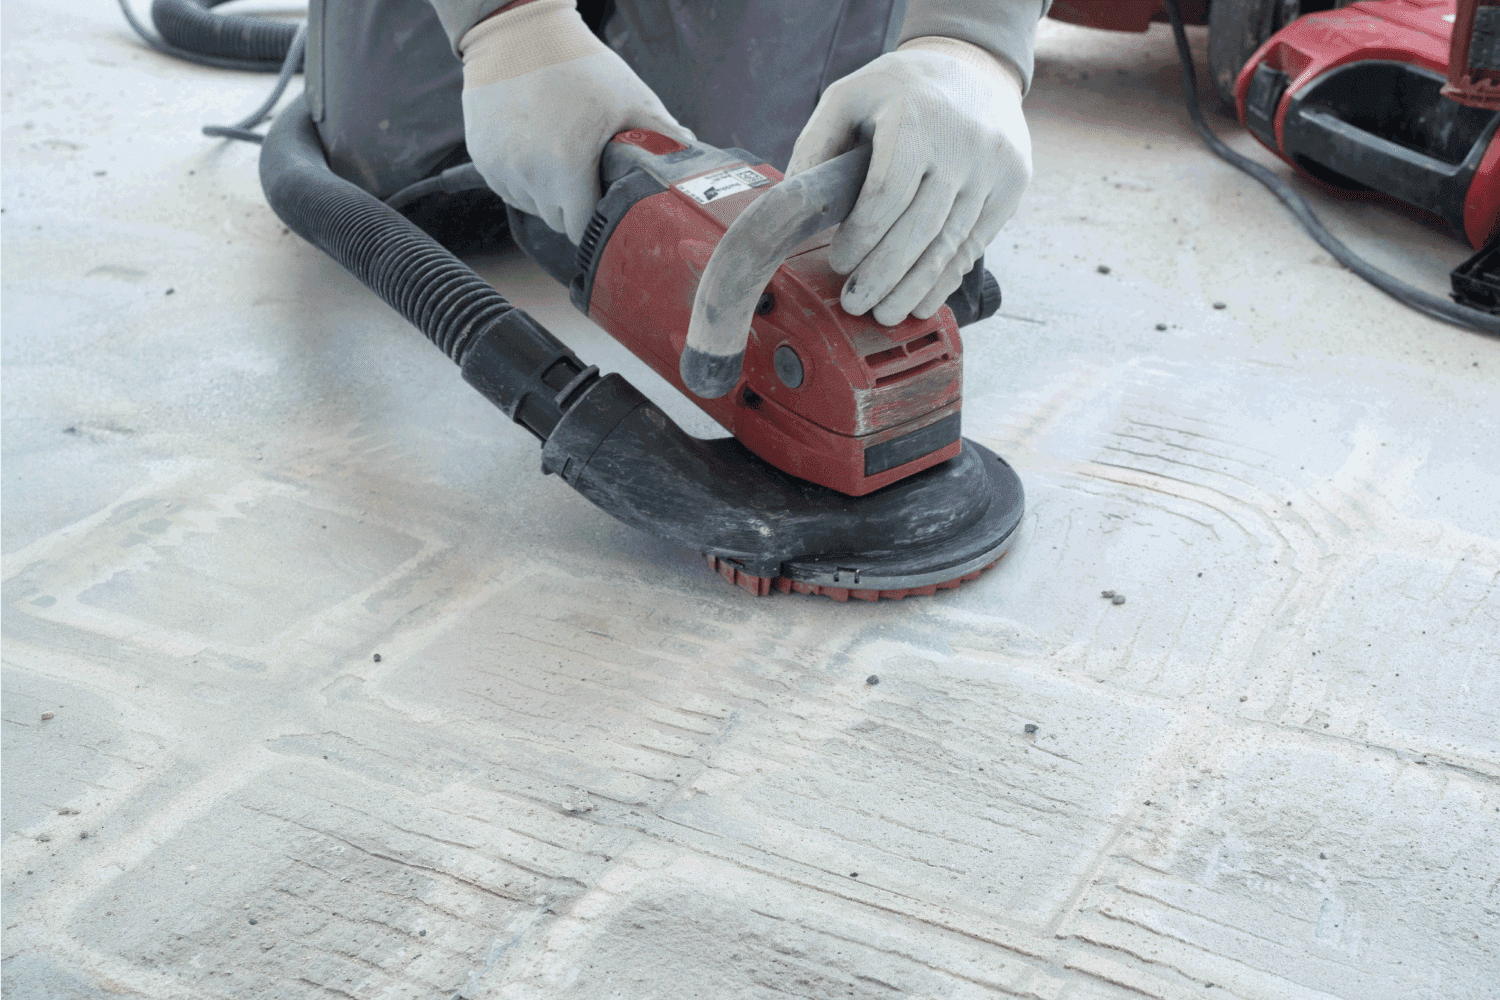 construction worker uses a power concrete grinder for removing tile glue and resin during renovation work